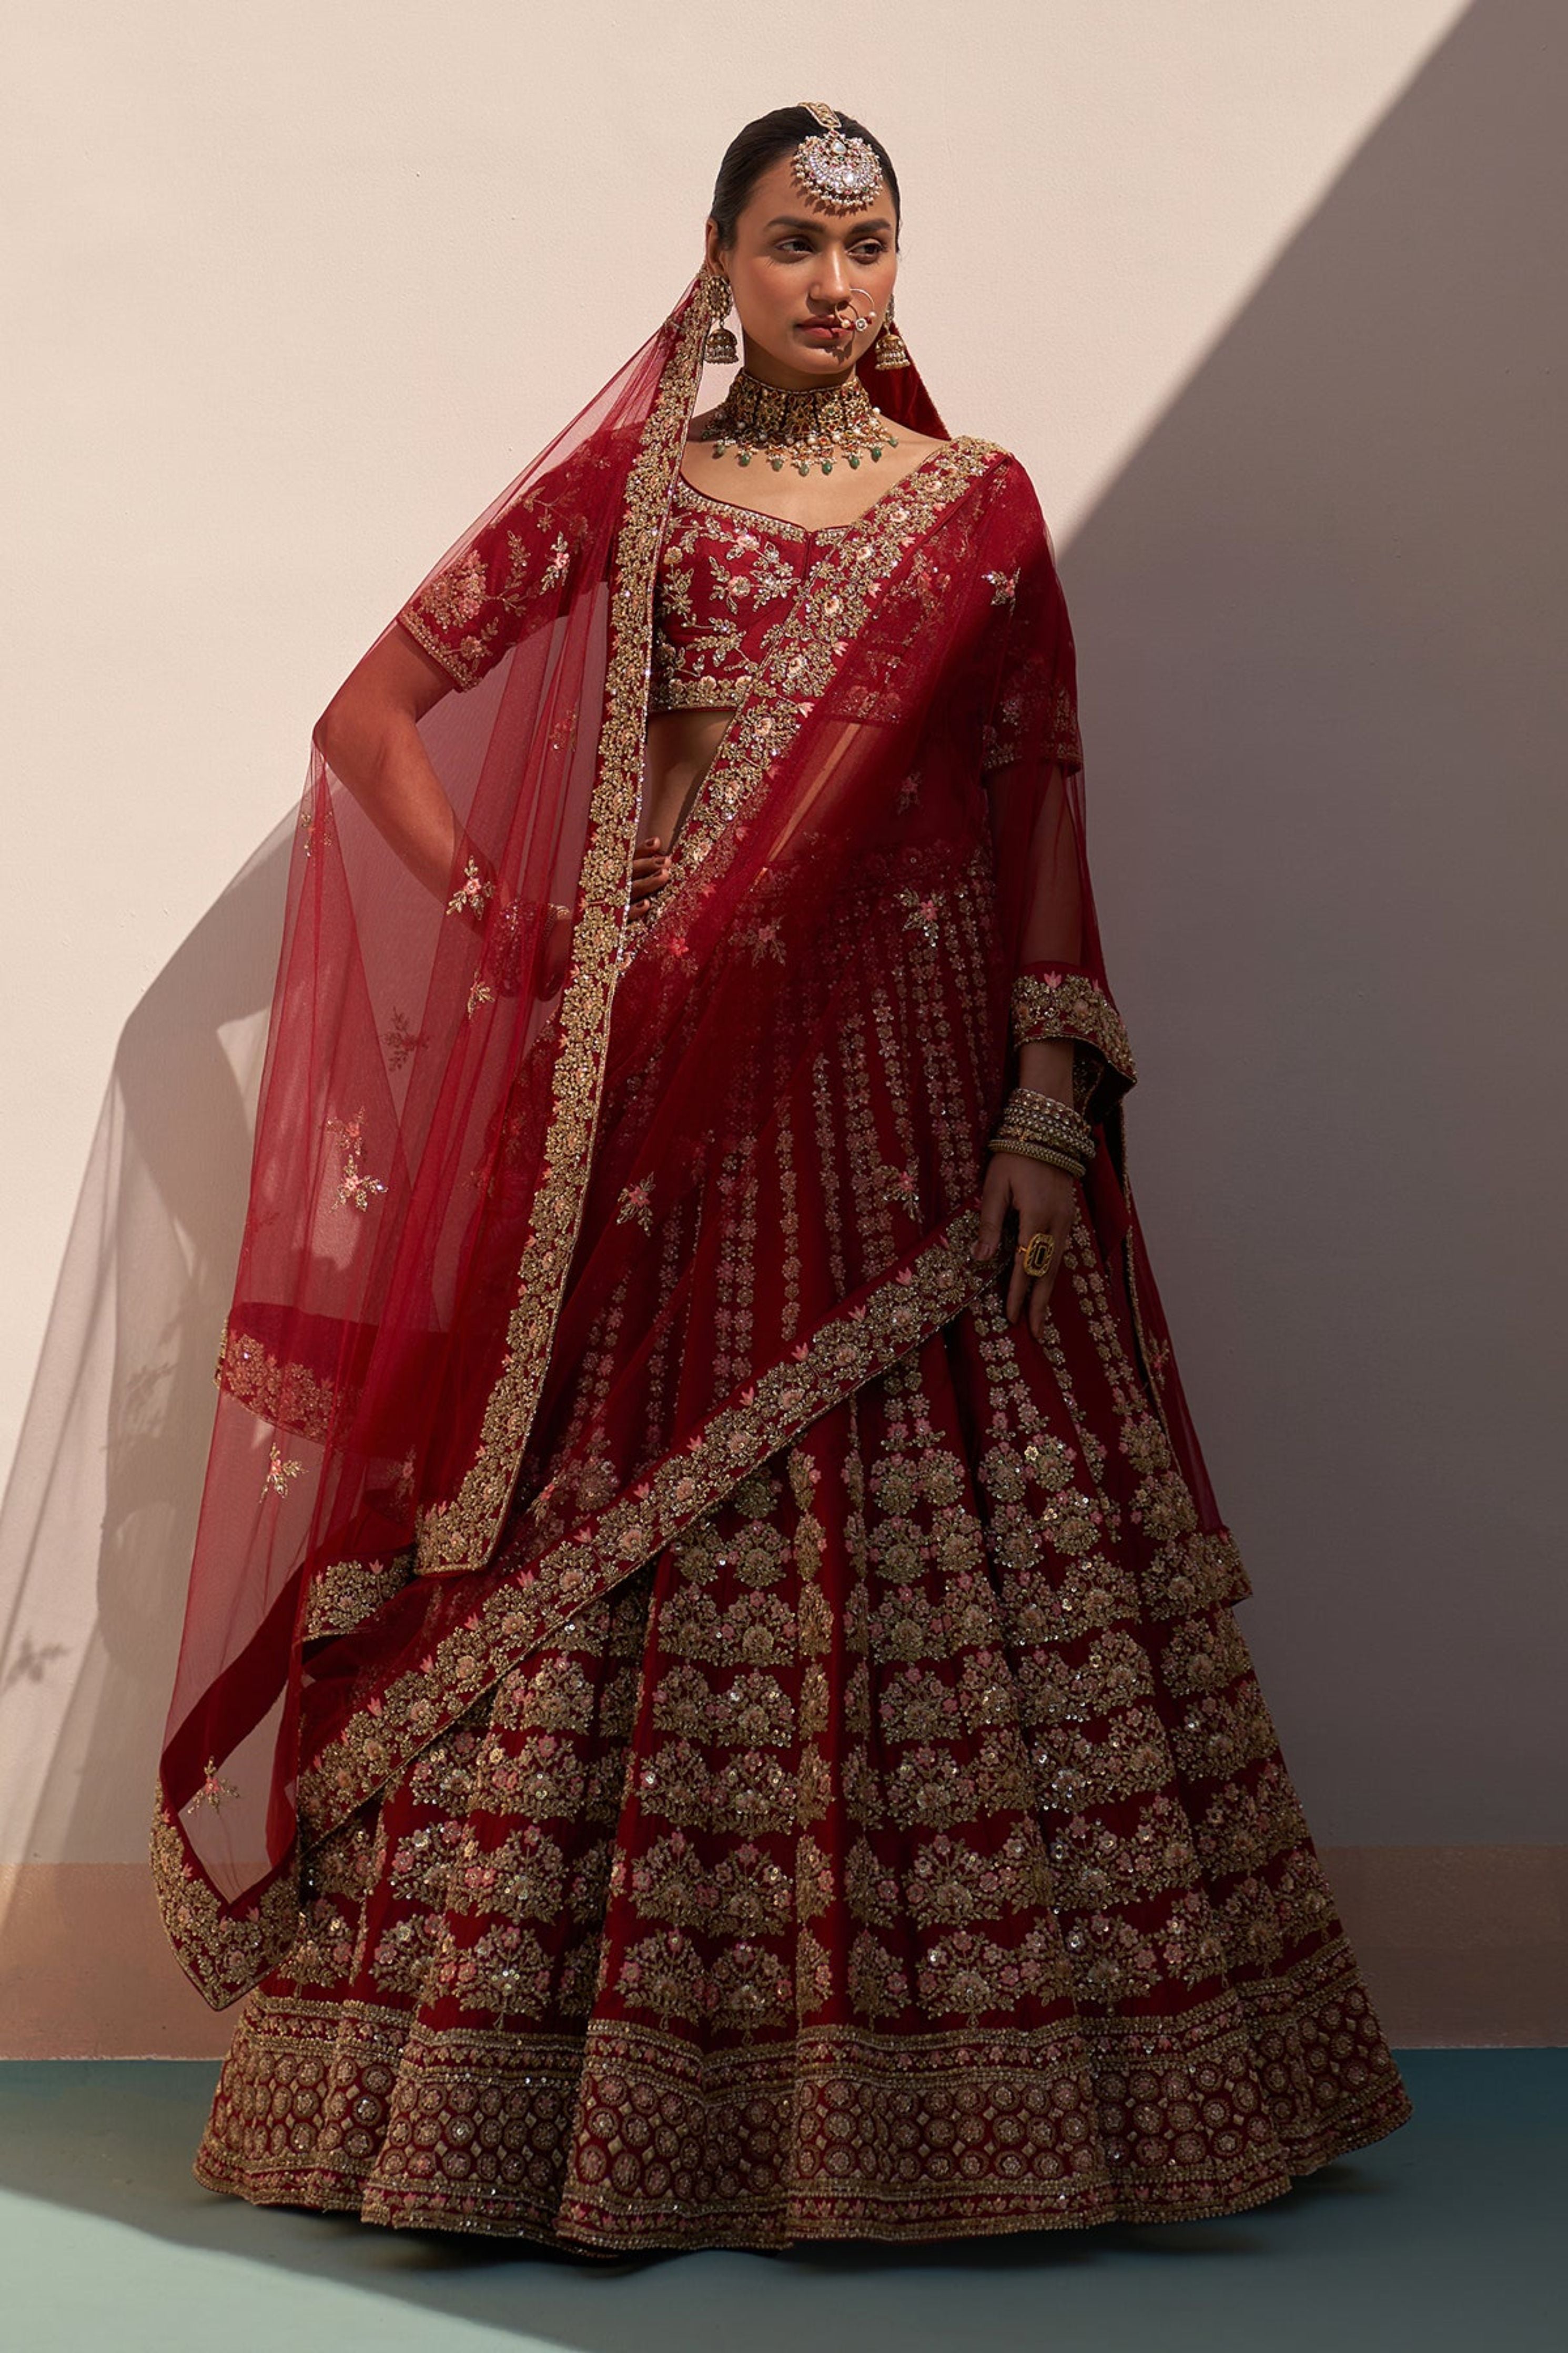 Koskii Peach-Coloured & Maroon Woven Design Semi-Stitched Lehenga & Blouse  with Dupatta Price in India, Full Specifications & Offers | DTashion.com